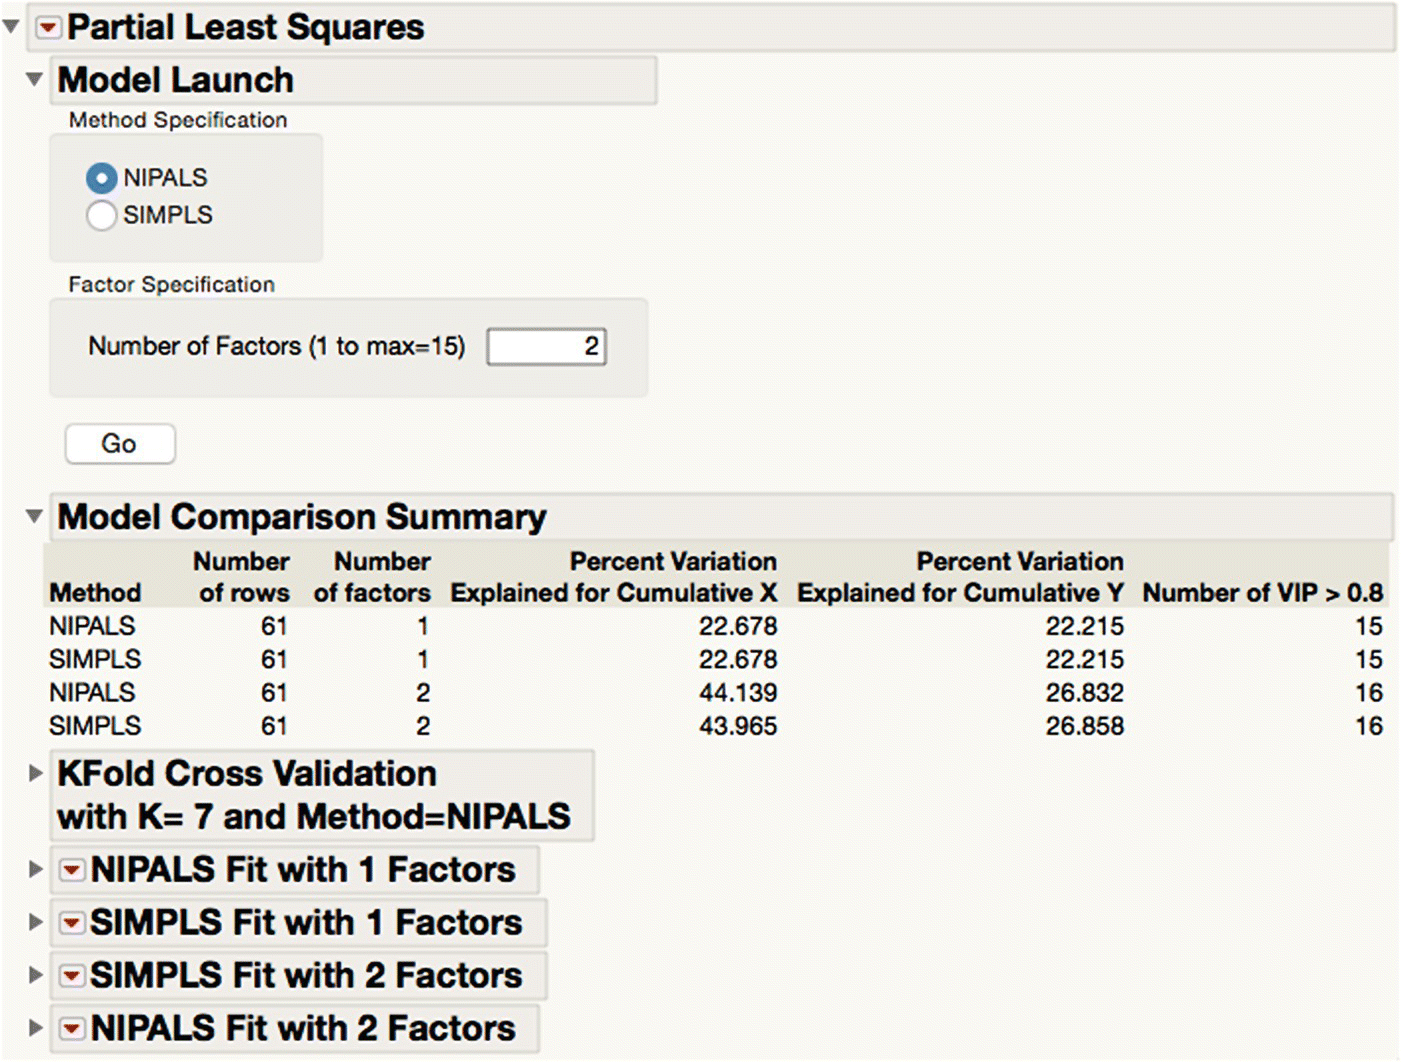 Snipped image of partial least squares, displaying model launch and model comparison summary.